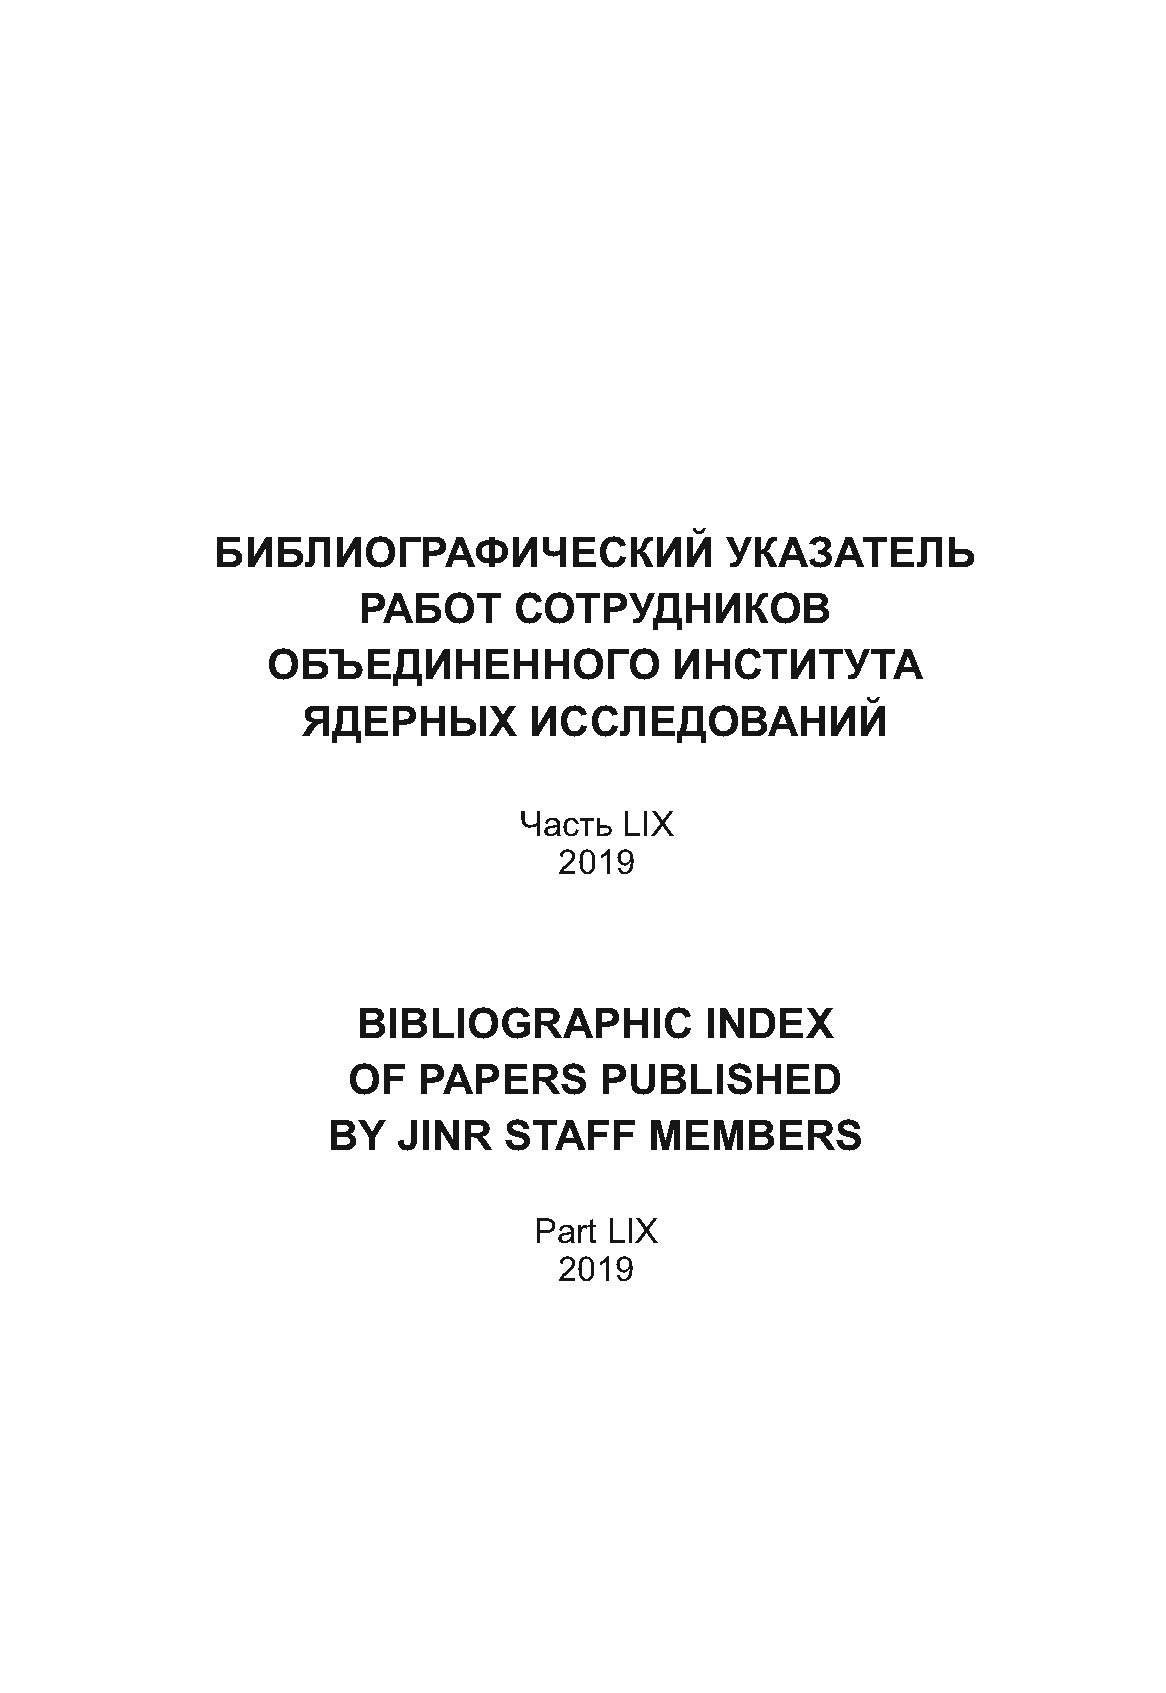 BIBLIOGRAPHIC INDEXOF PAPERS PUBLISHED BY JINR STAFF MEMBERS: Part LIX 2019